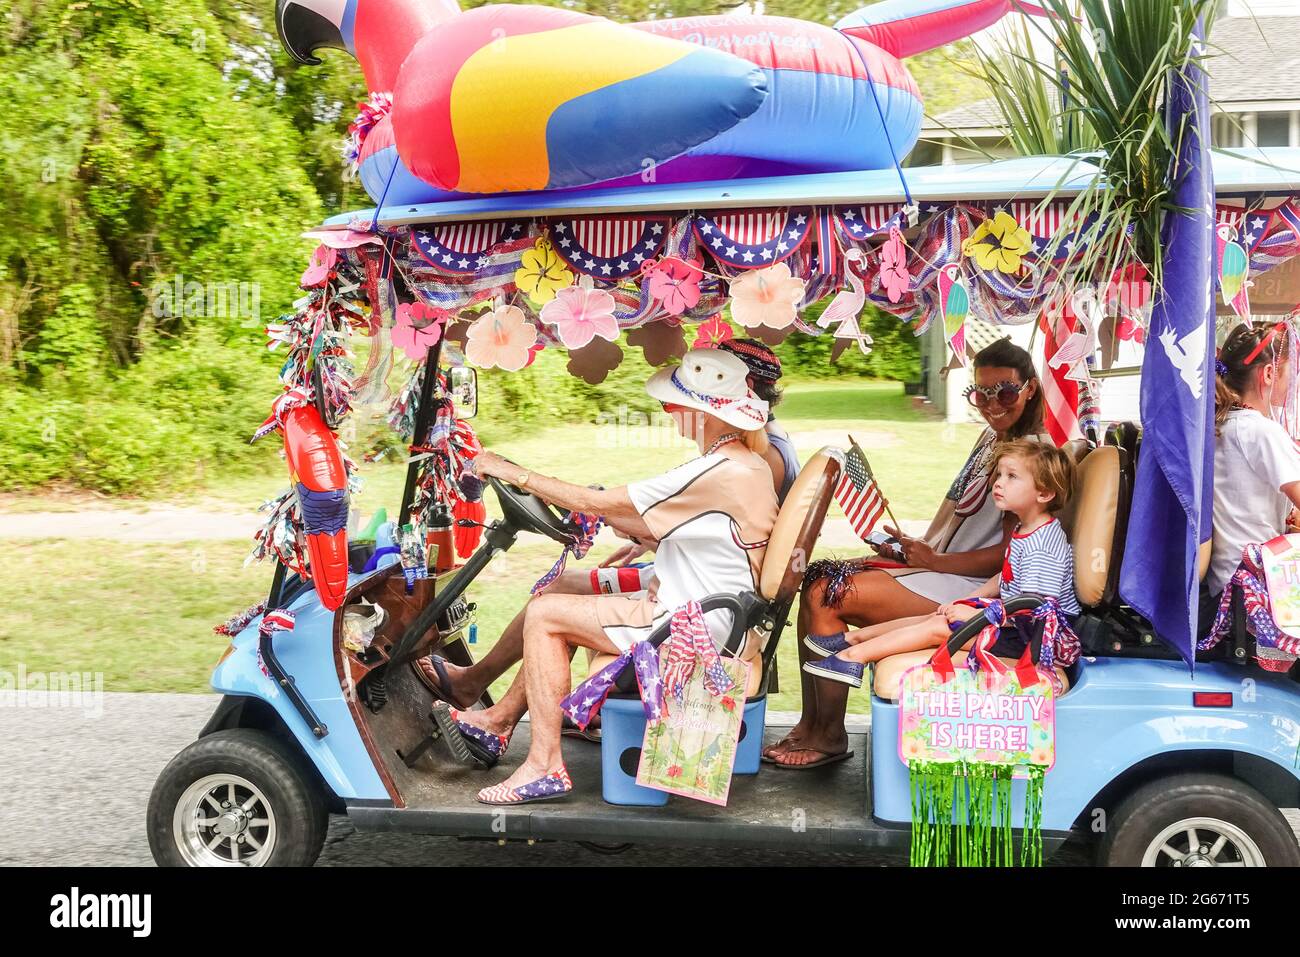 Sullivans Island, South Carolina, USA. 3rd July, 2021. A family drives their decorated golf cart during the annual Bicycle and Golf cart parade celebrating Independence Day July 3, 2021 in Sullivans Island, South Carolina. Credit: Planetpix/Alamy Live News Stock Photo